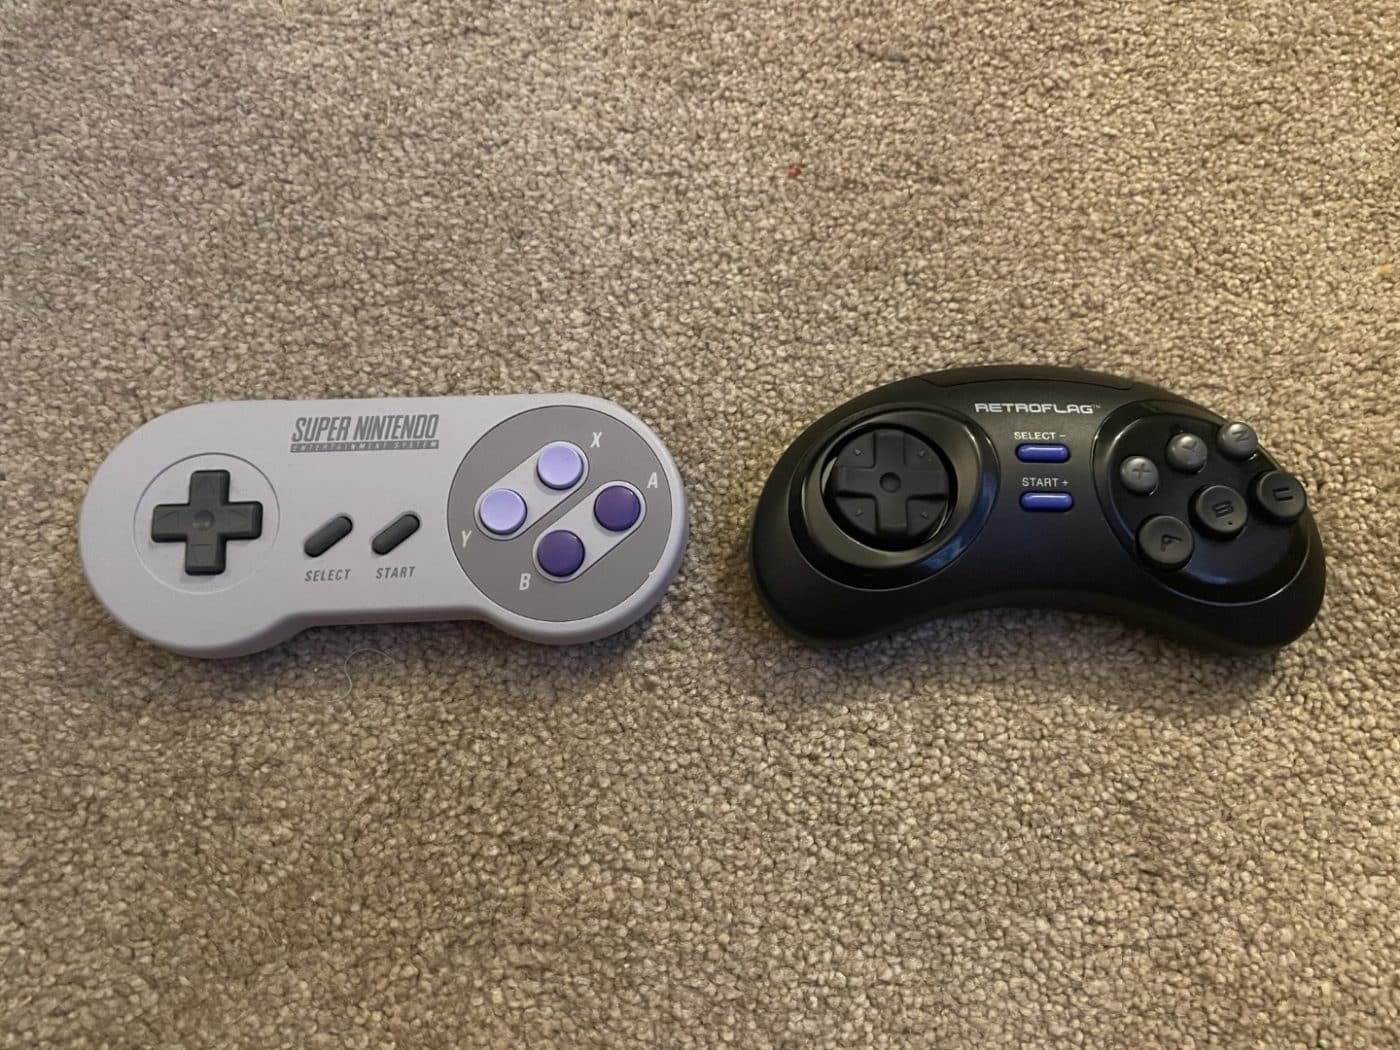 The retroflag classic 2. 4g controller-m might be a better retro controller than the official snes style controller from nintendo.